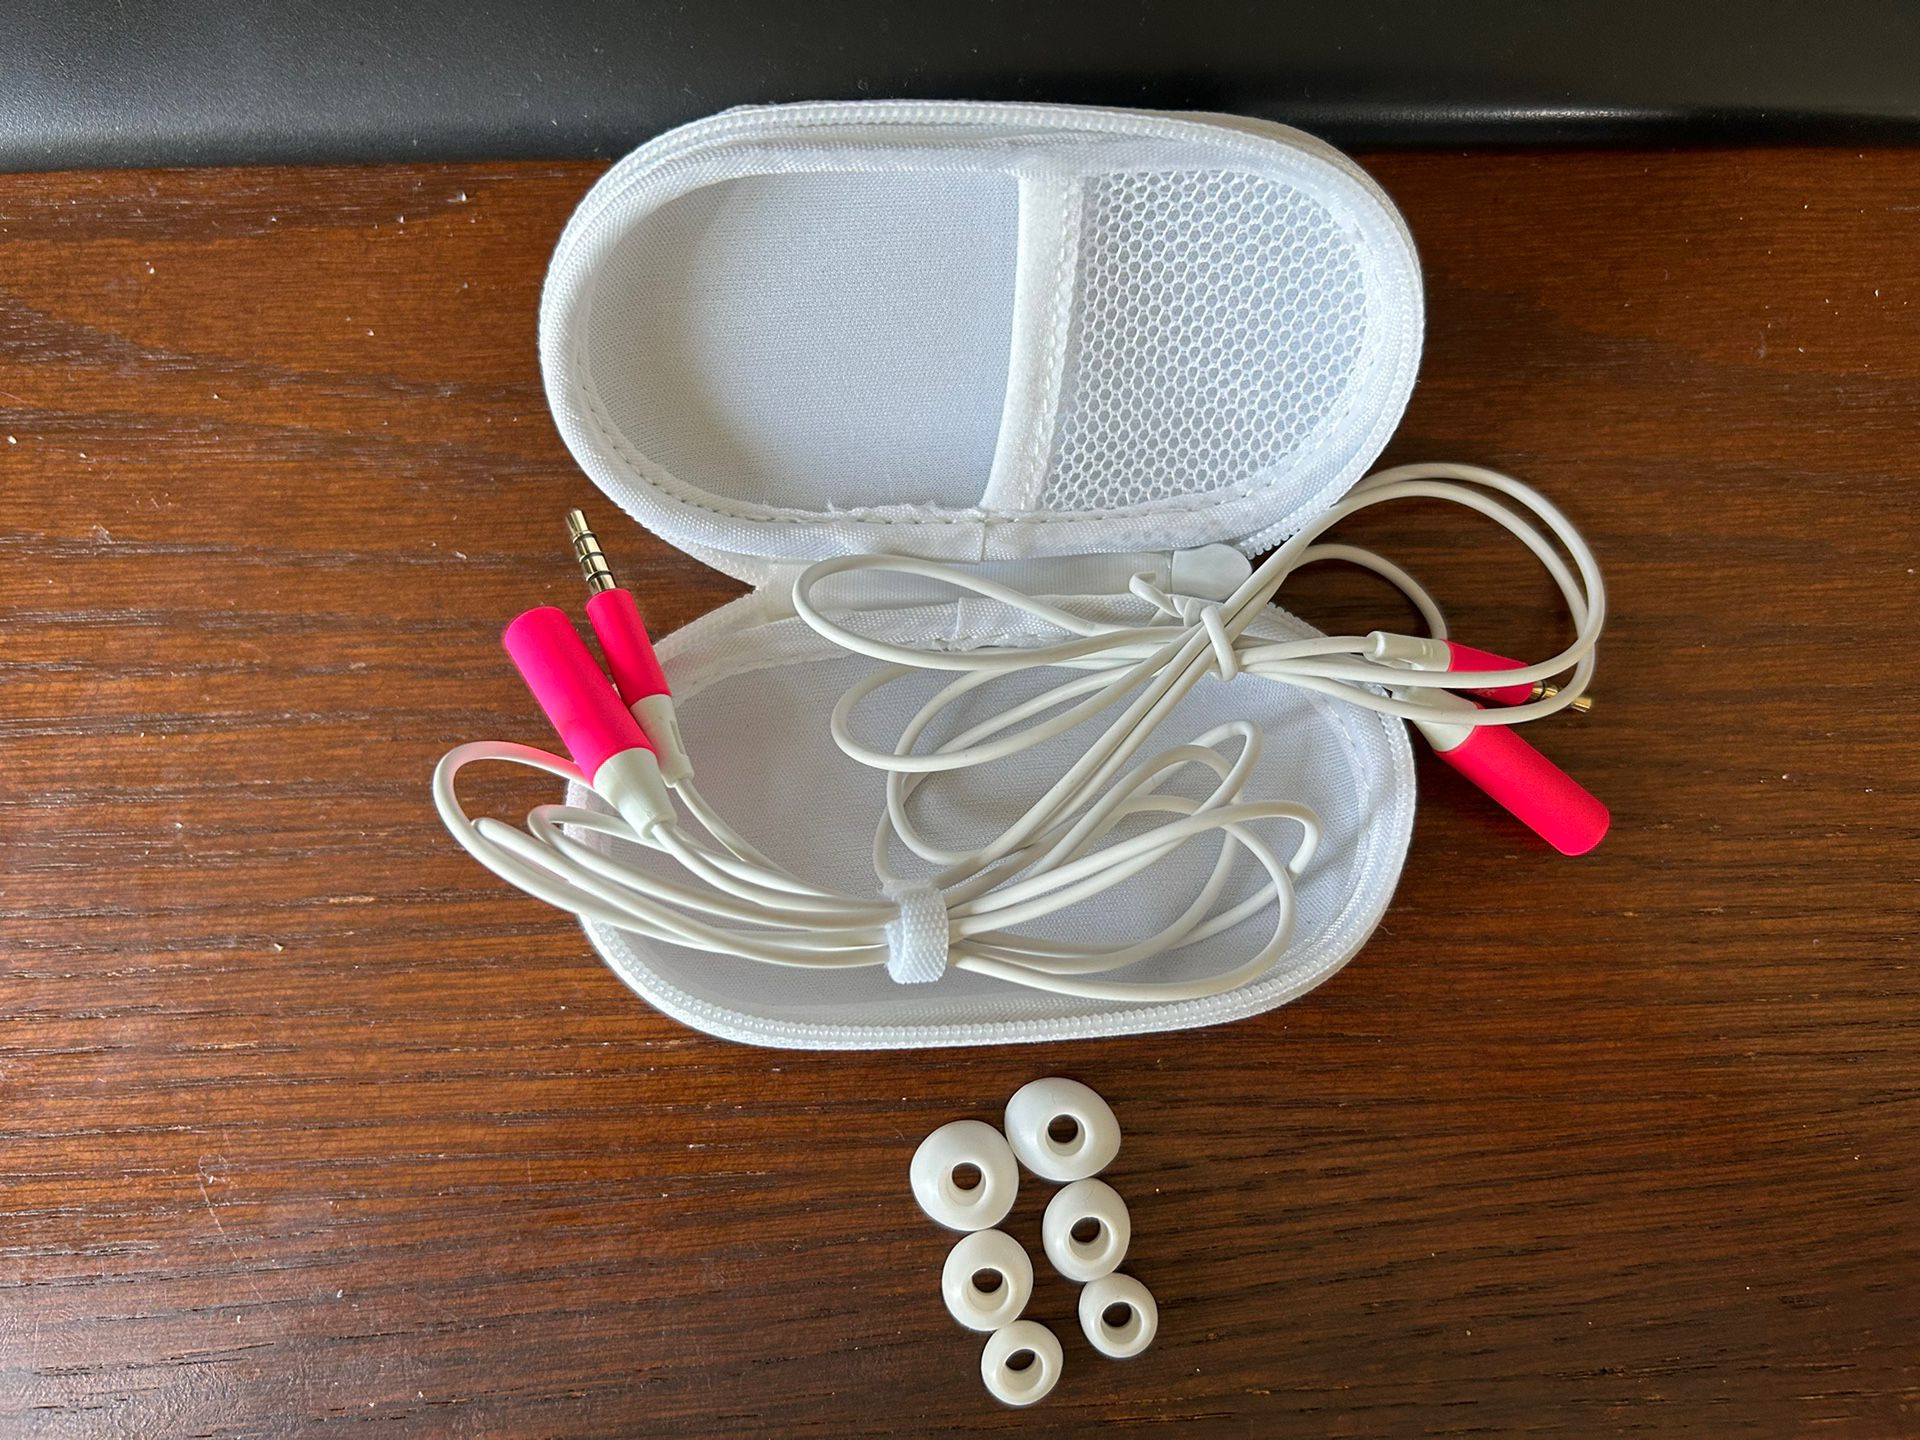 Beats By Dre 2 Pink Replacement Cables For Wired Powerbeats & 3 Pairs Of Earplug Cushions